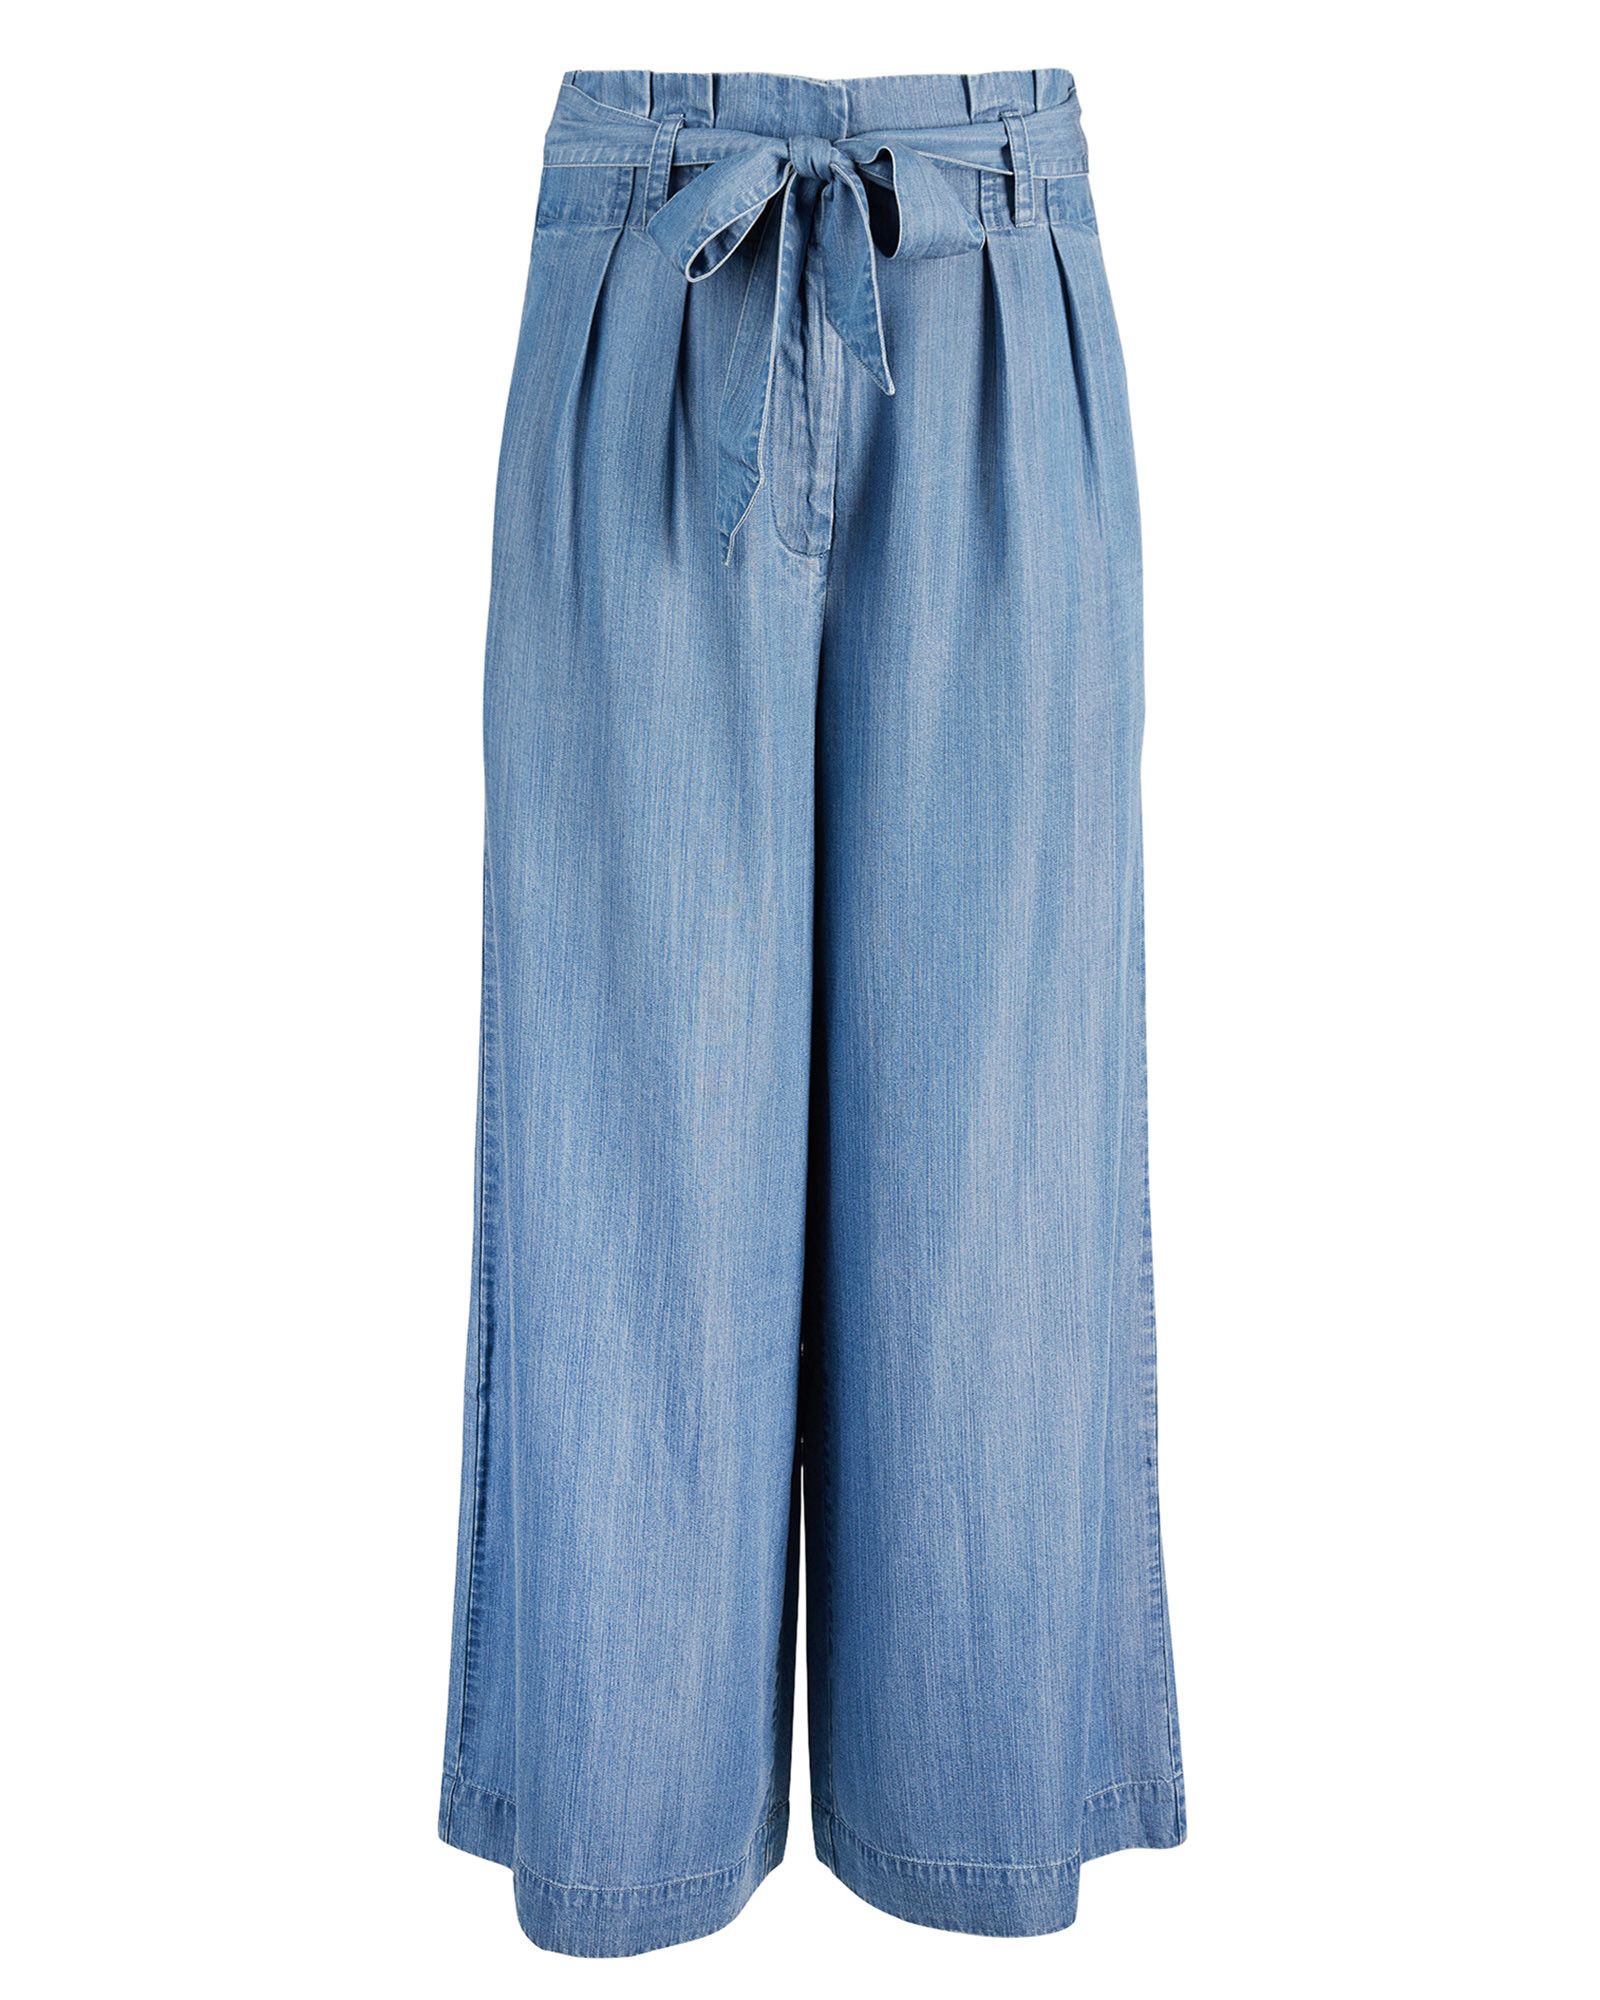 HM Paper Bag Trousers  The Ultimate Guide to Springs Denim Trends Means  Your Skinny Jeans Just Got a Vacation  POPSUGAR Fashion Photo 24